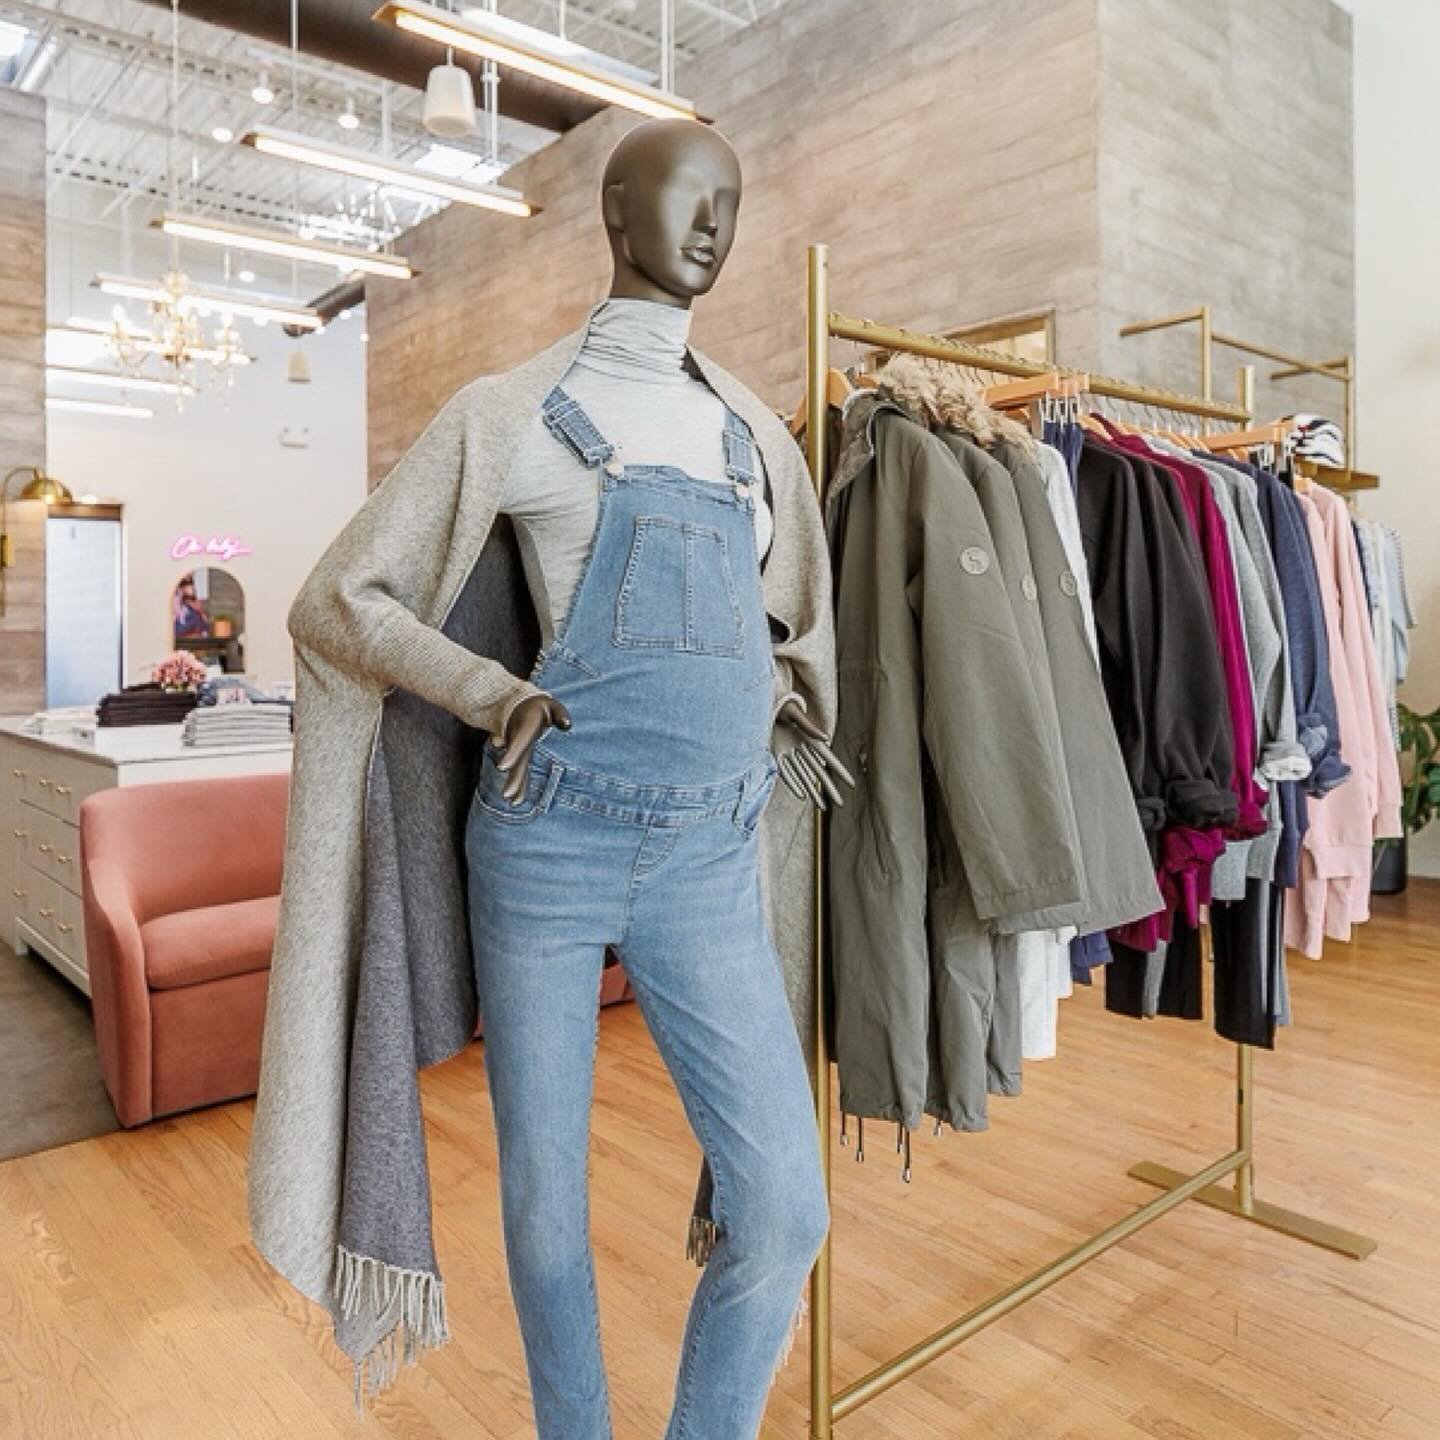 Enjoy some photos from a recent shoot I did with Seraphine Maternity in Wicker Park.

If you&rsquo;re a store owner, have you considered a branding shoot for your space? It&rsquo;s a great way to invite those casual online shoppers to visit your stor